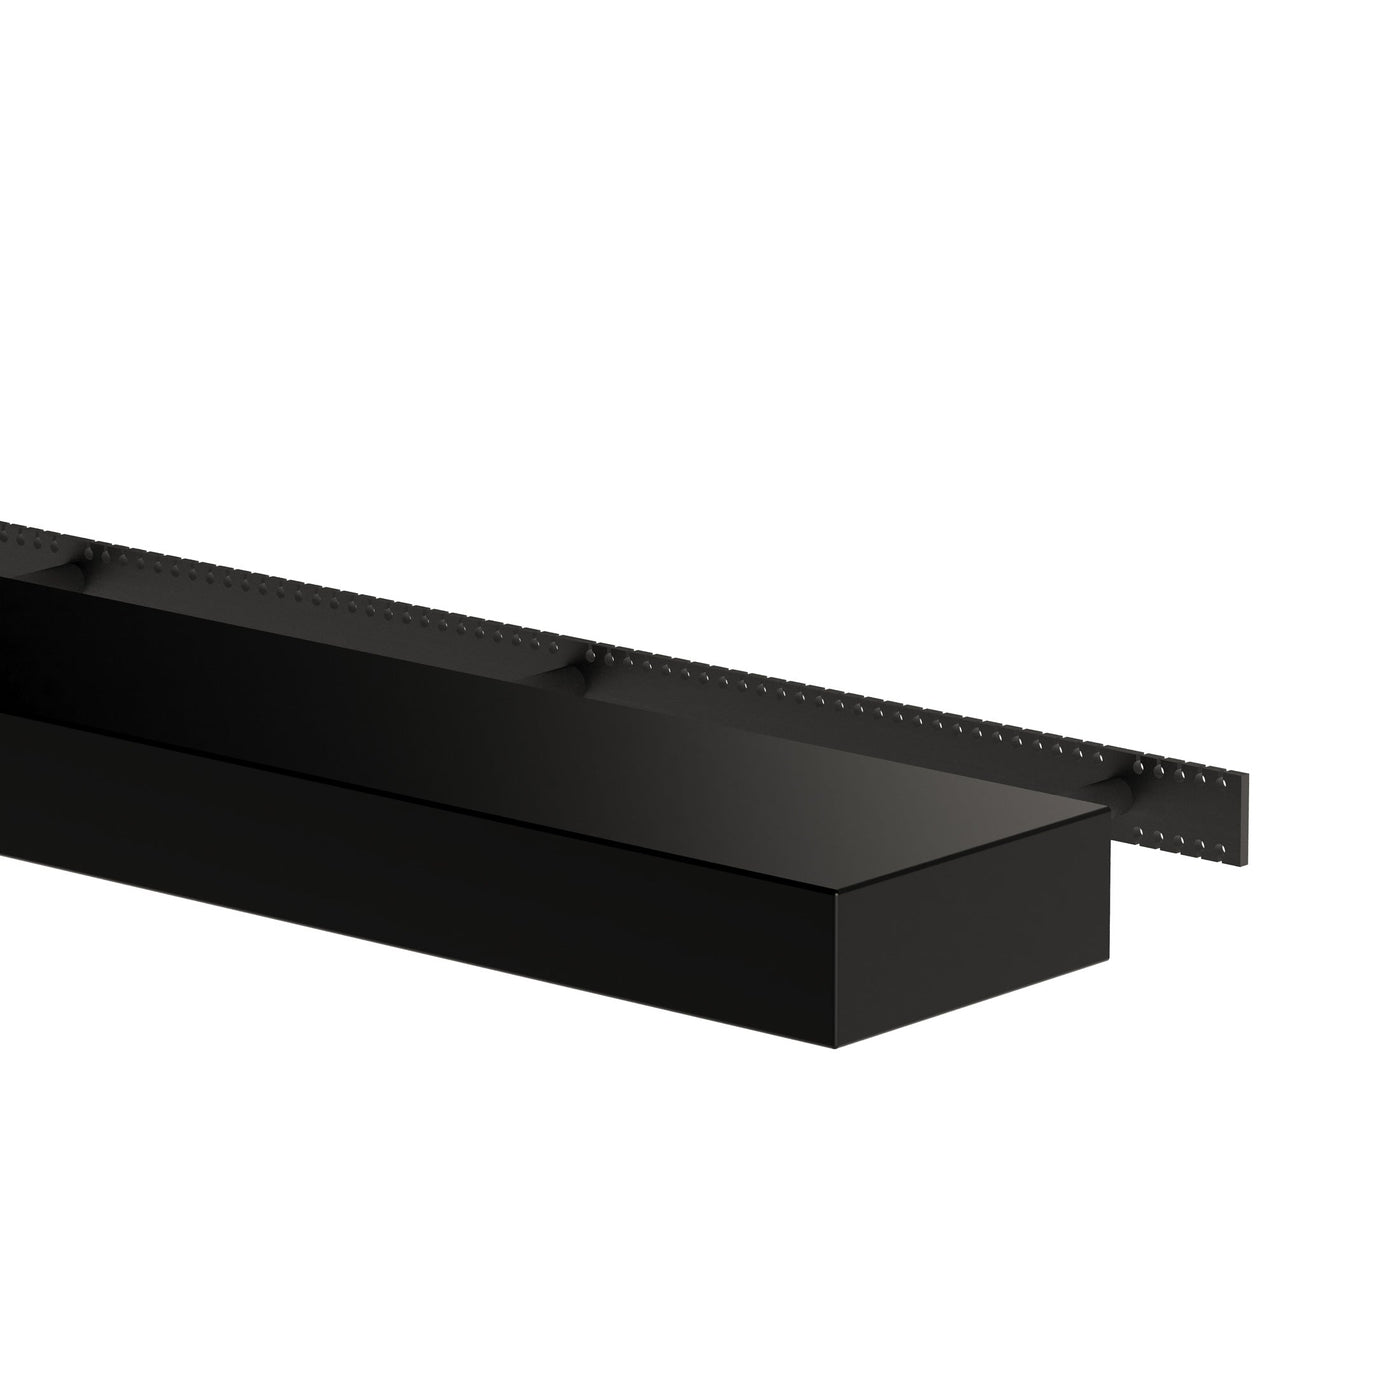 Floating Shelf- Black Conversion Varnish Paint - 4 Inches Thick